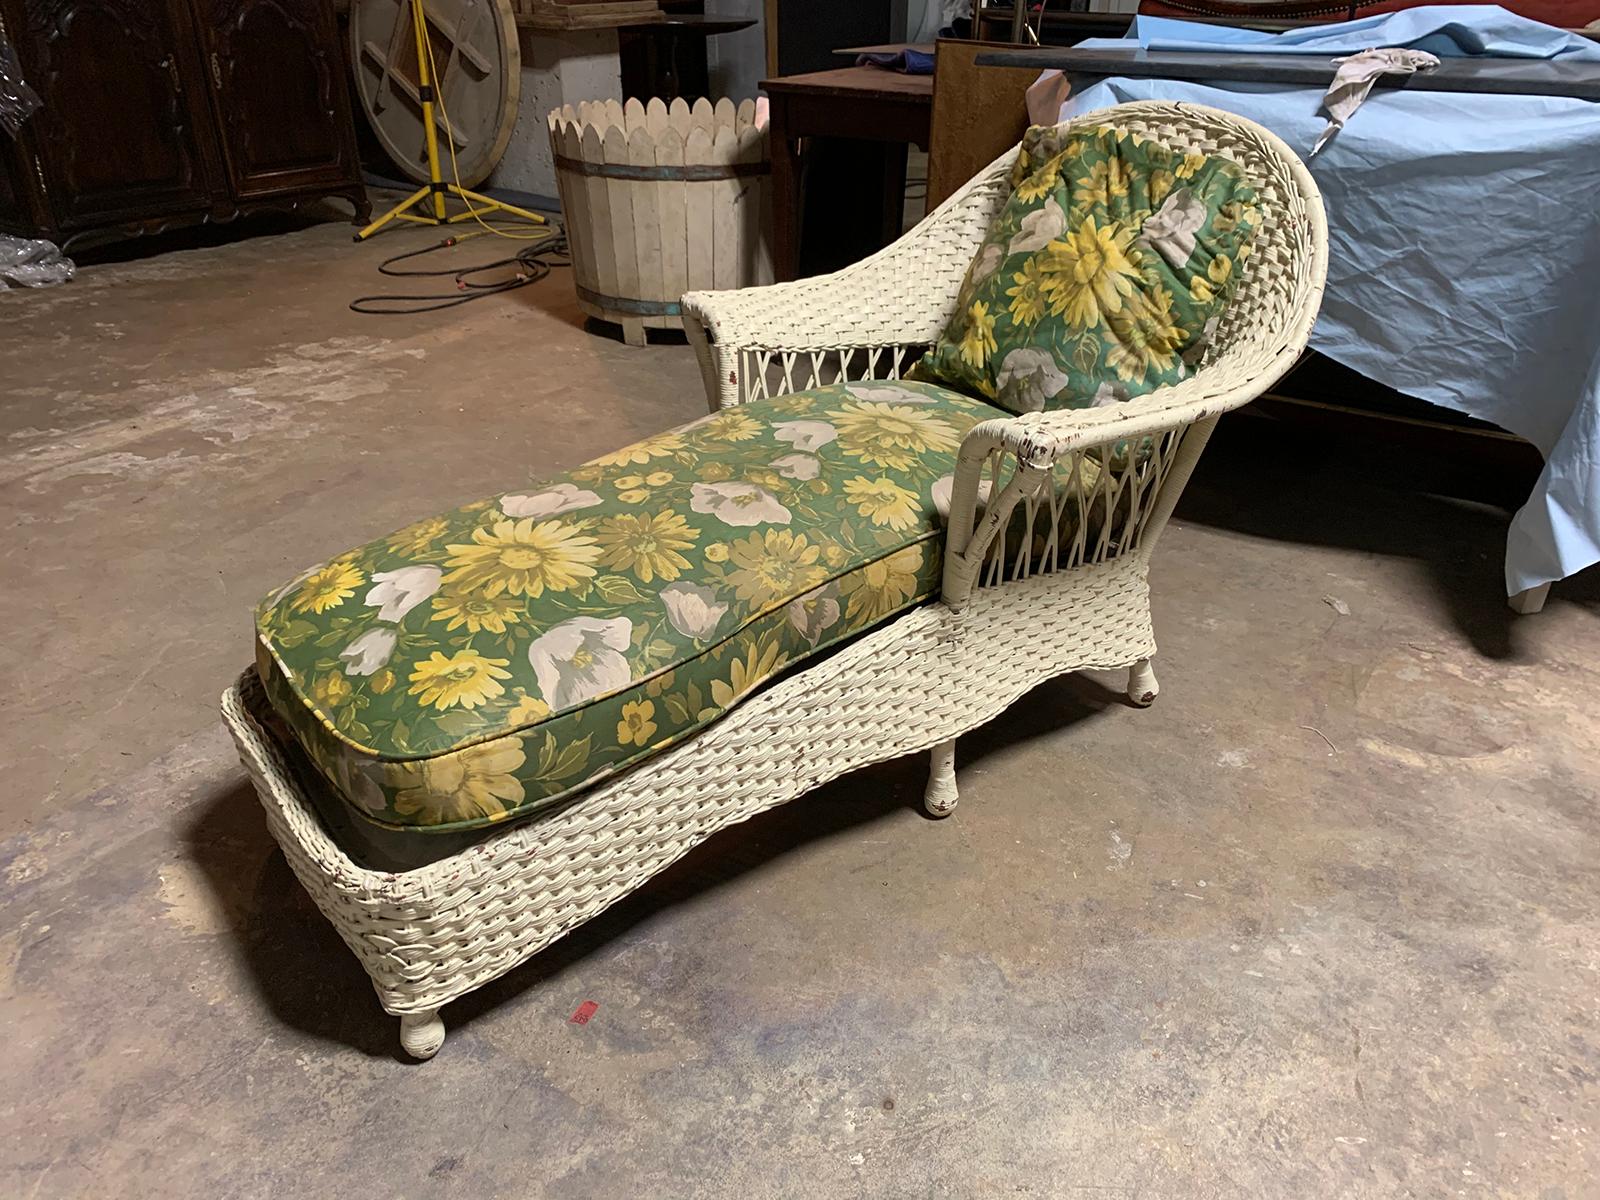 Early 20th century wicker chaise with green floral upholstery and pillow
Measures: 30